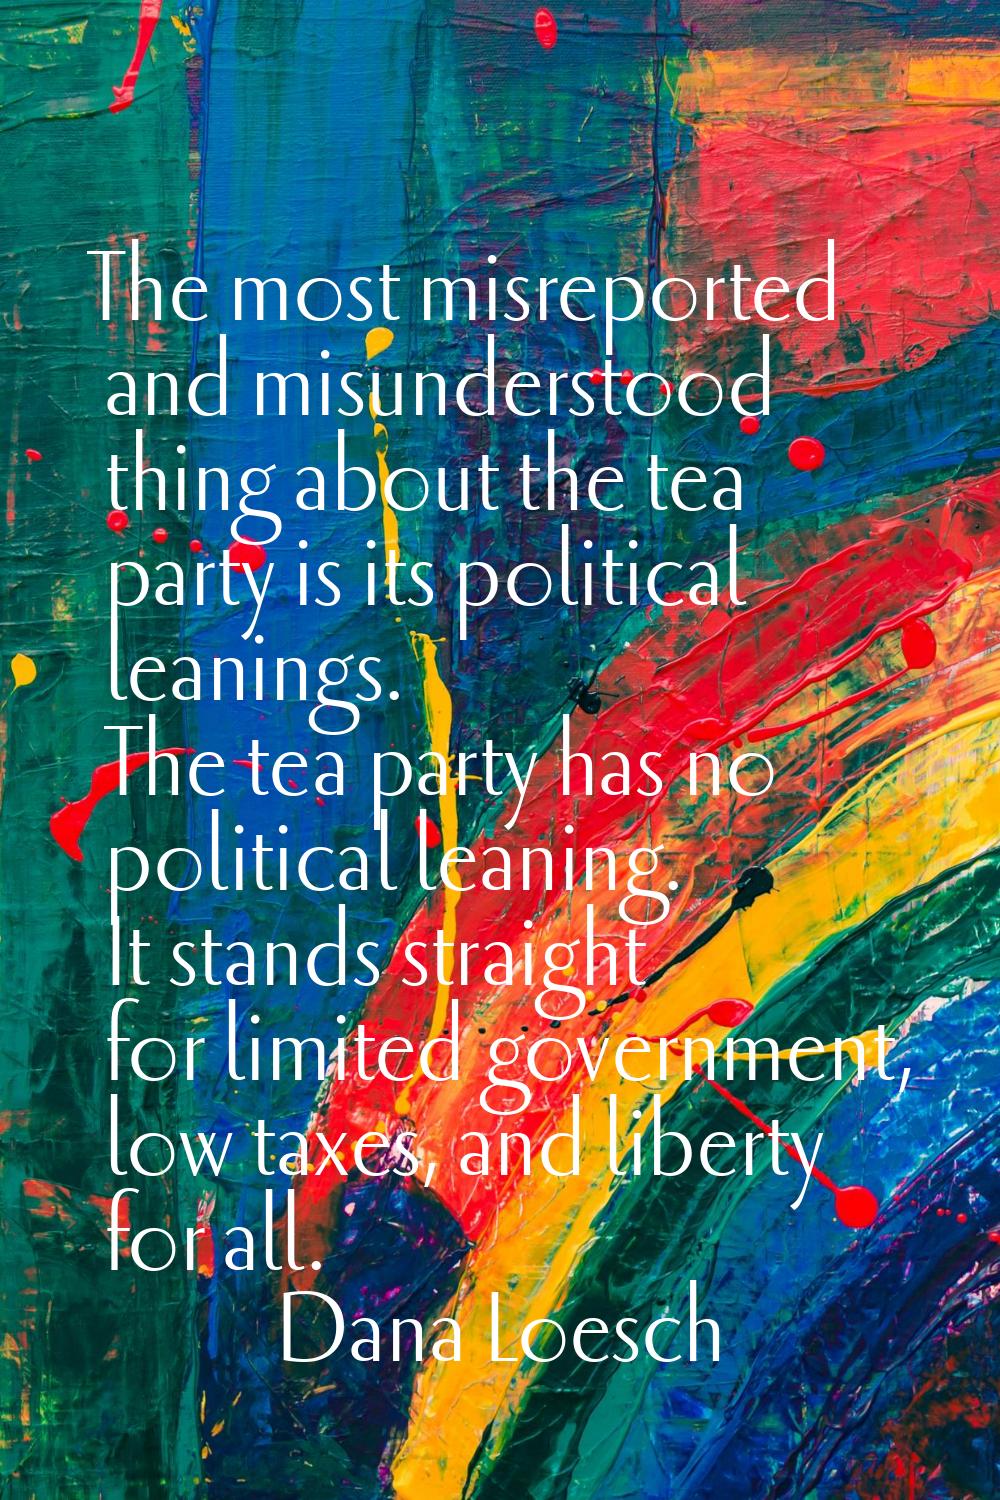 The most misreported and misunderstood thing about the tea party is its political leanings. The tea